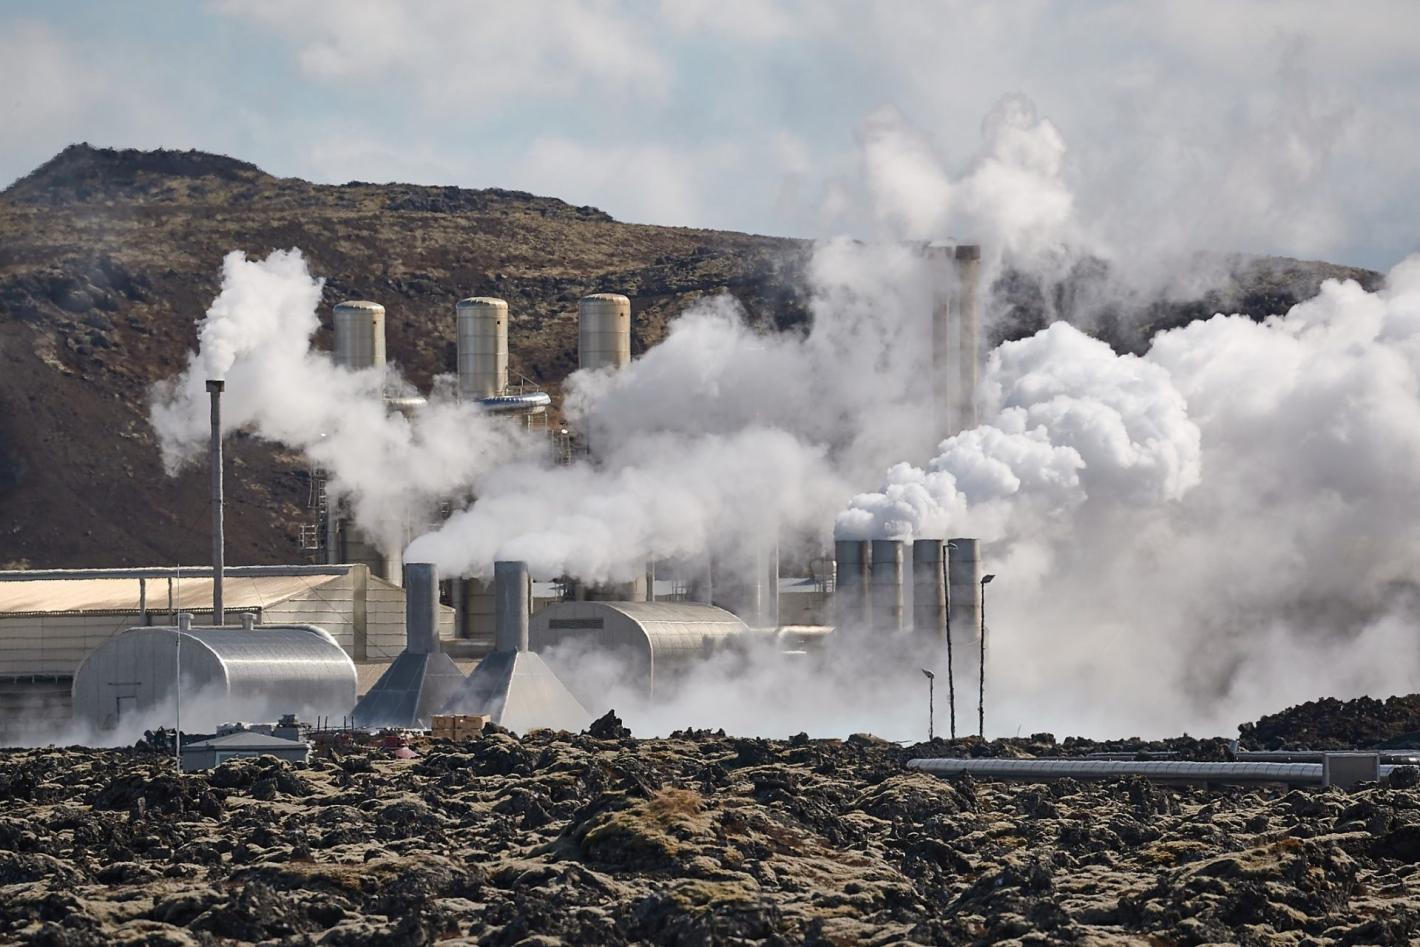 Where is Geothermal Energy Most Commonly Found?